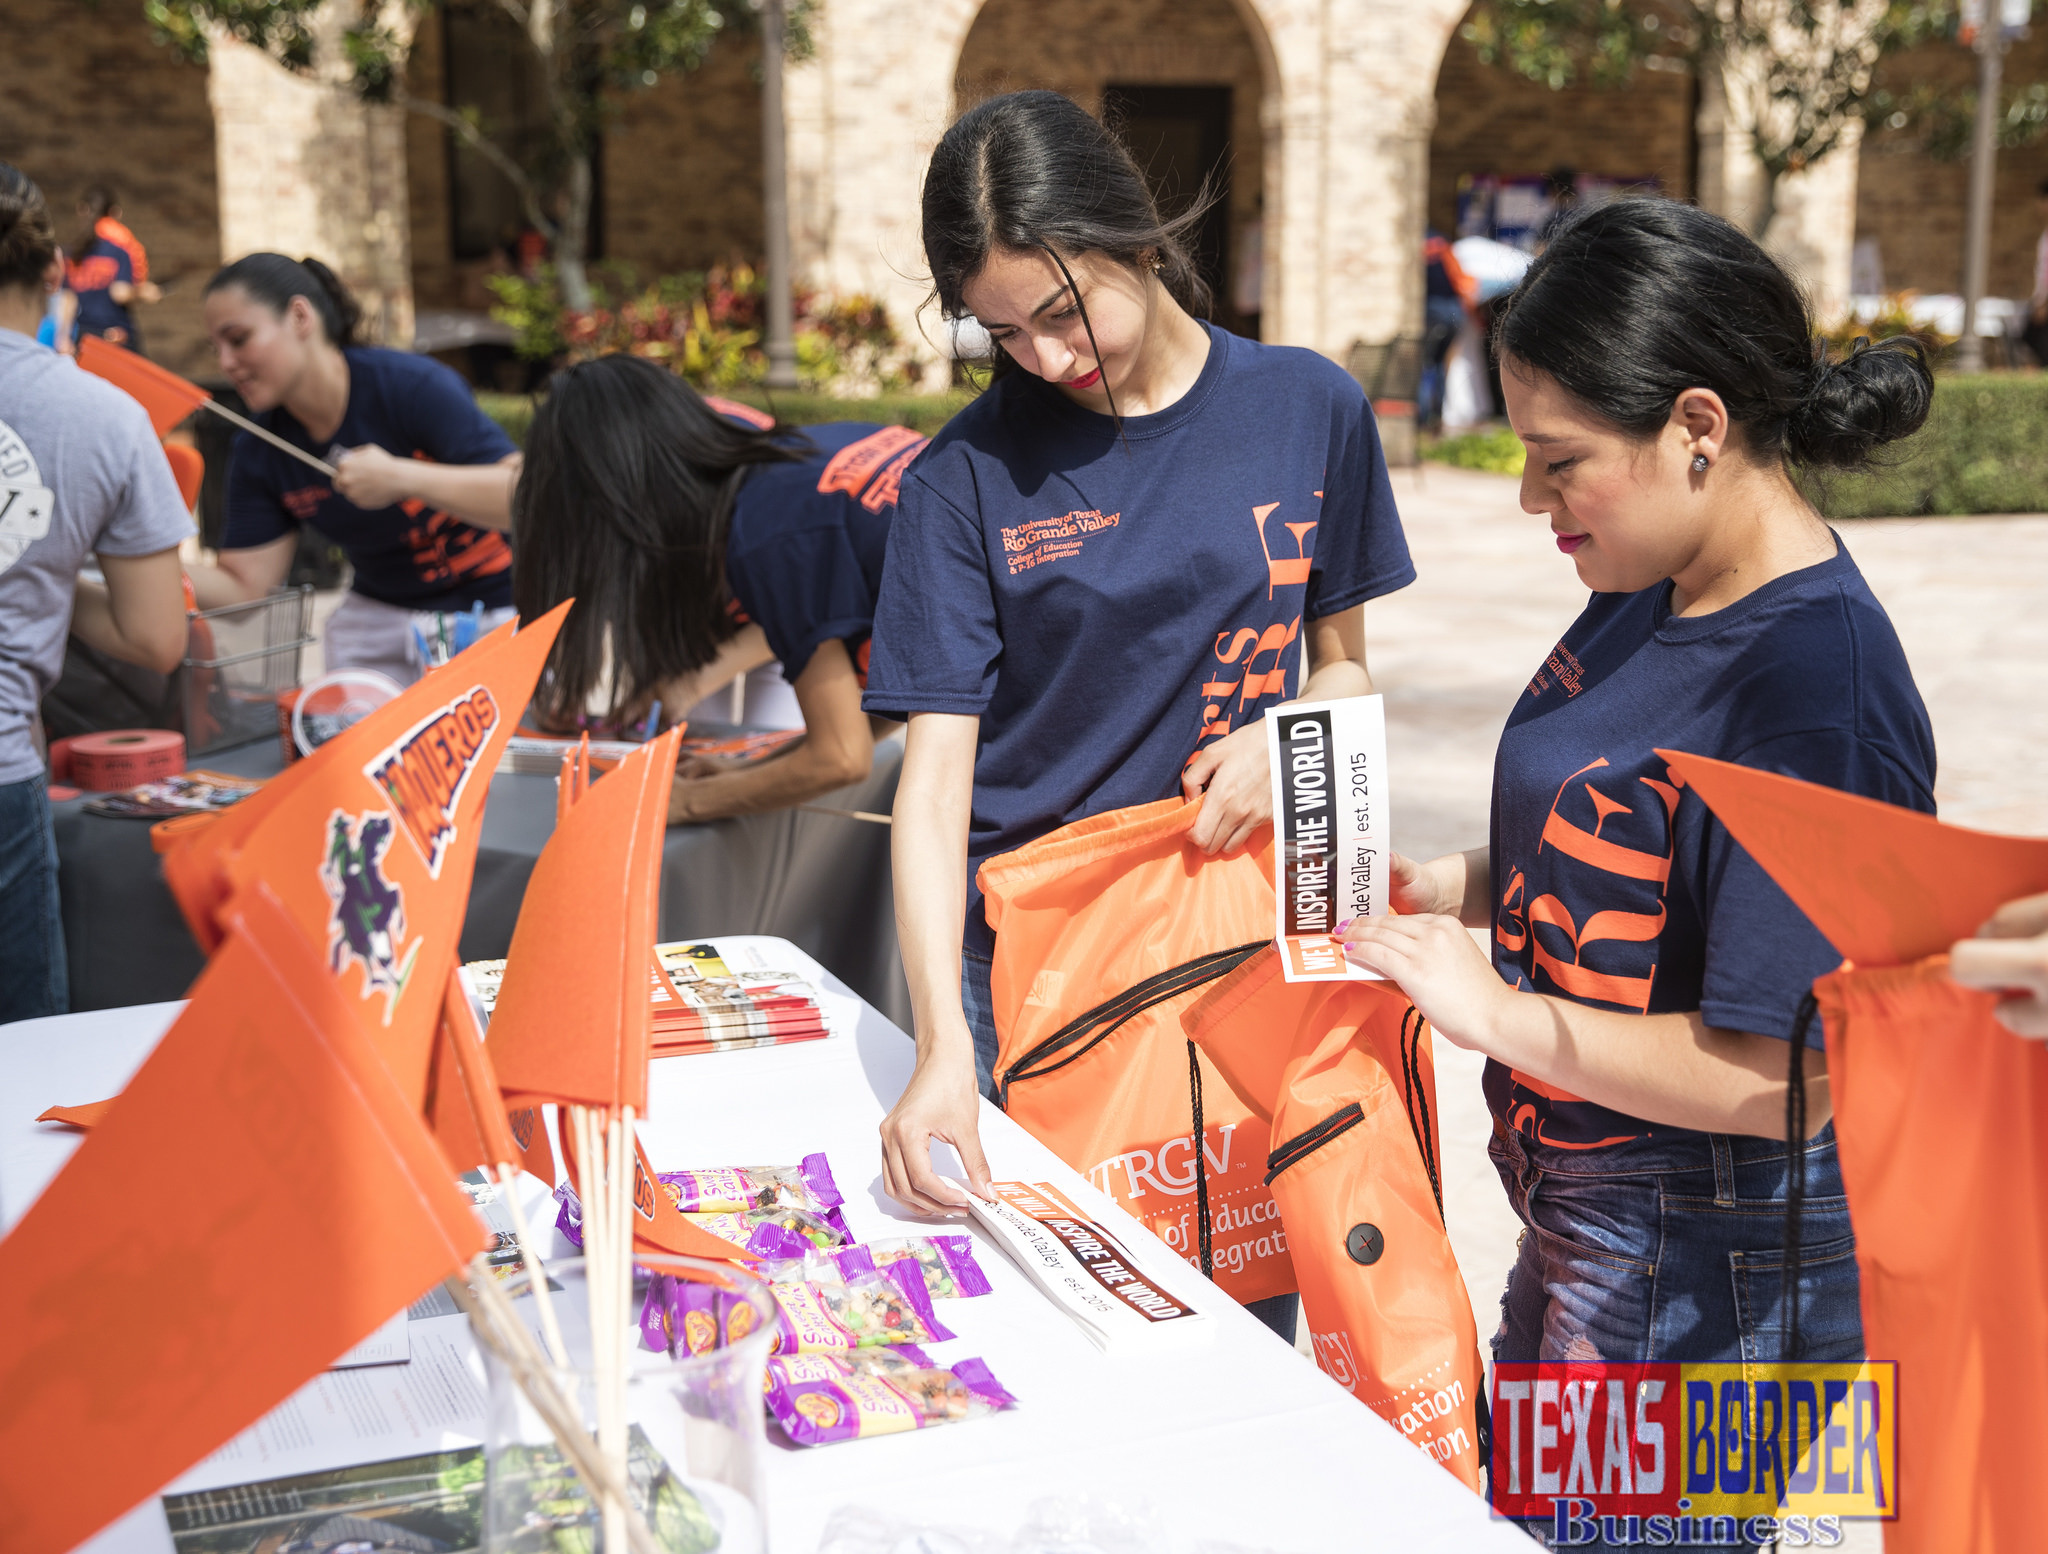 The second of two UTRGV College of Education Open House events will be from 10 a.m. to 1 p.m. Saturday, June 18, at the Education Complex on the Edinburg Campus. The first was held June 11 on the Brownsville Campus and featured activities for youths and families, like a free book fair and Build-a-Book. (UTRGV Photos by David Pike)